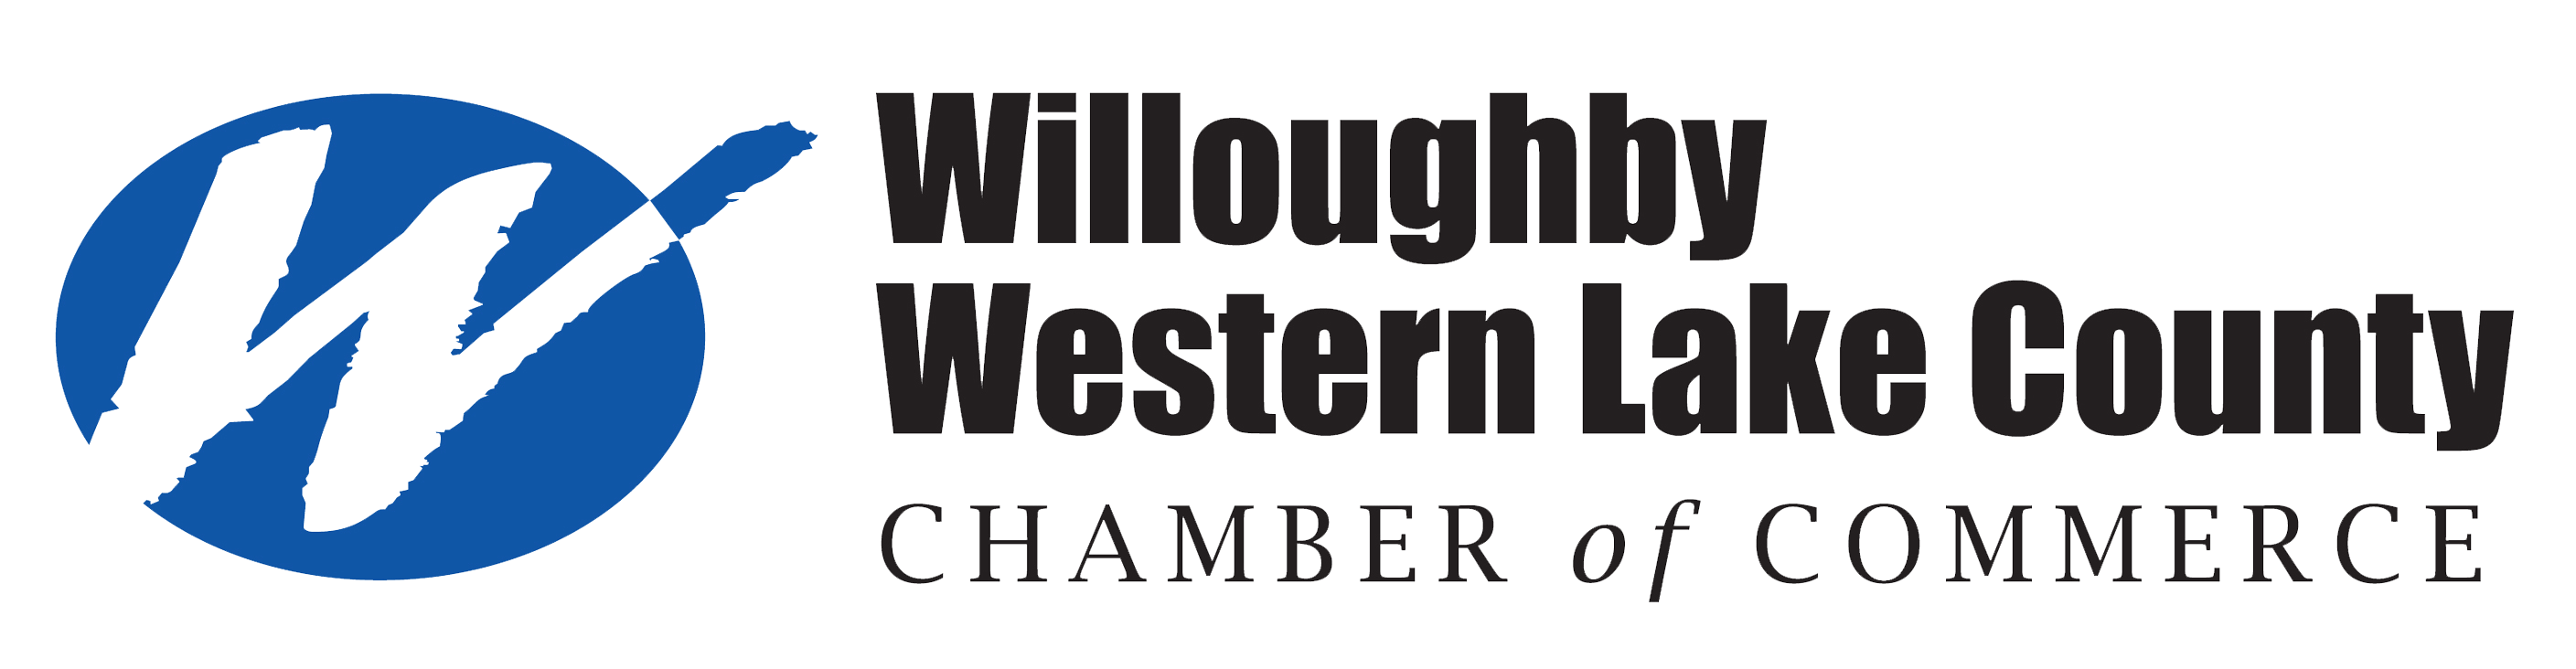 Willoughby Western Lake county Chamber of Commer